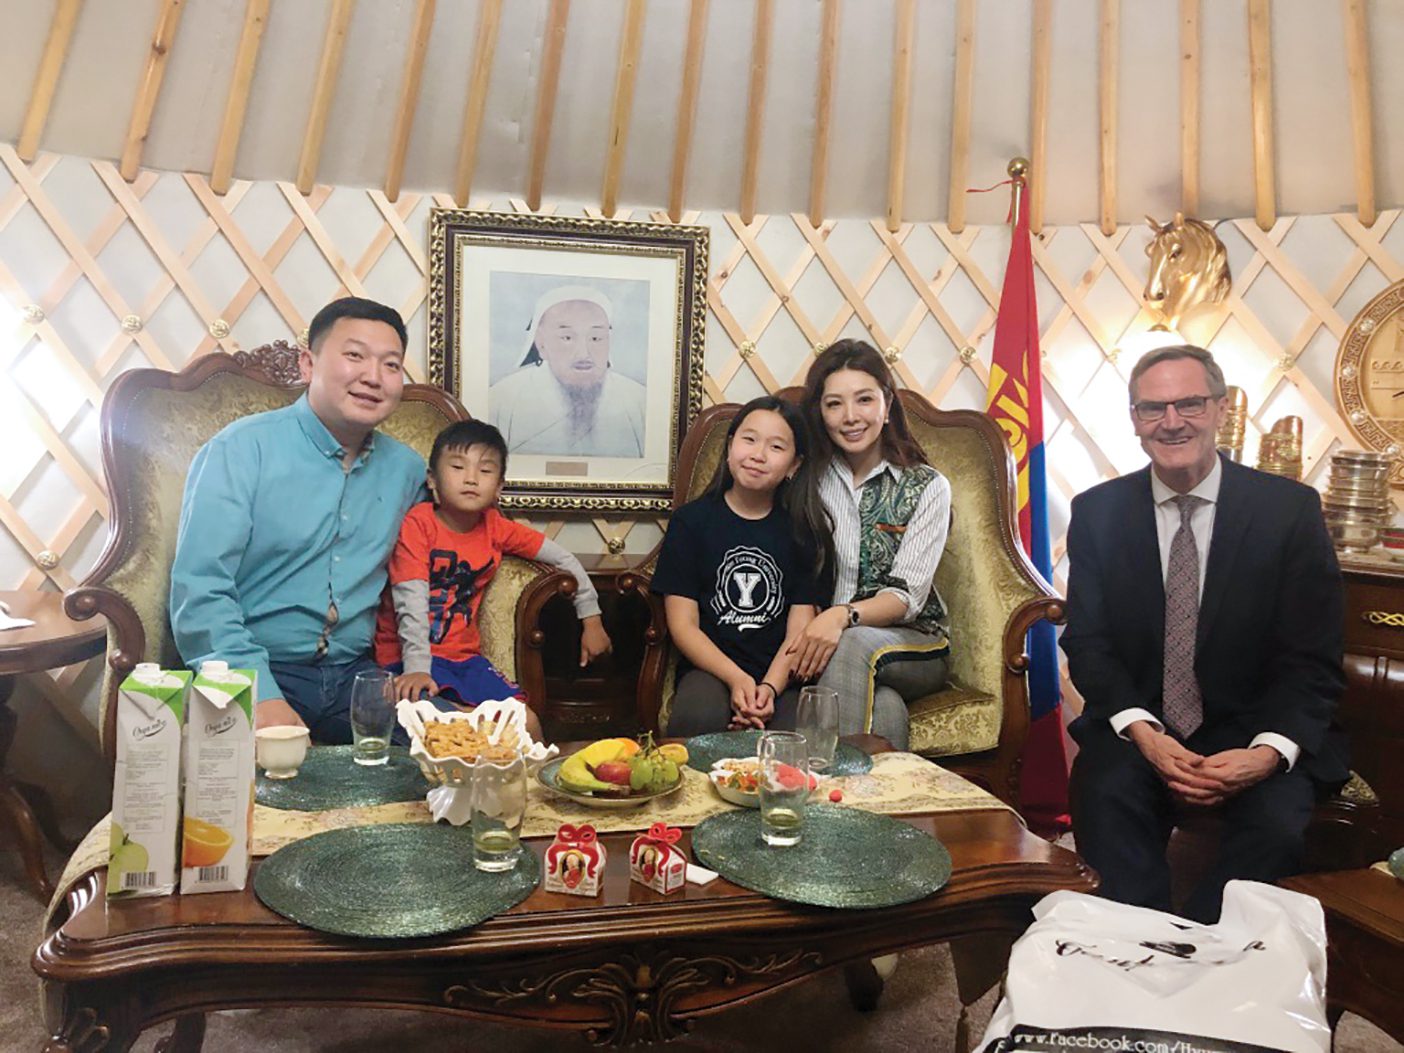 A man sits with a Mongolian family of one father, one mother, one son, and one daughter inside a traditional Mongolian yurt home.